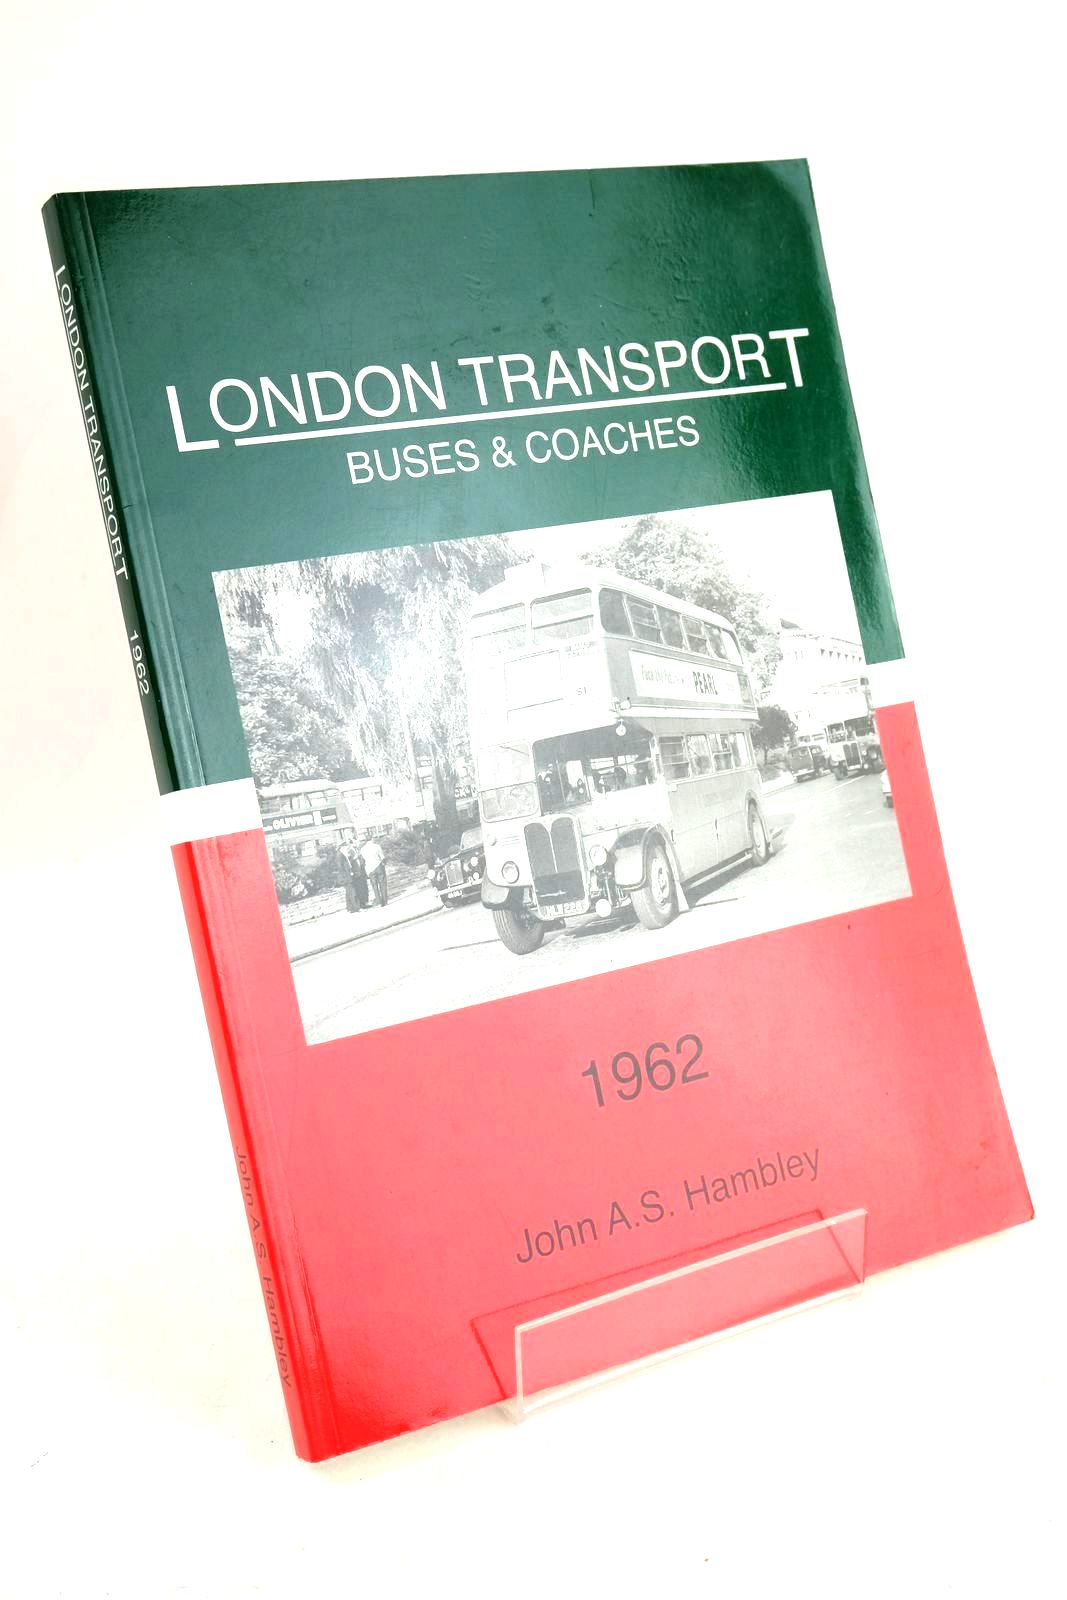 Photo of LONDON TRANSPORT BUSES & COACHES 1962- Stock Number: 1327379